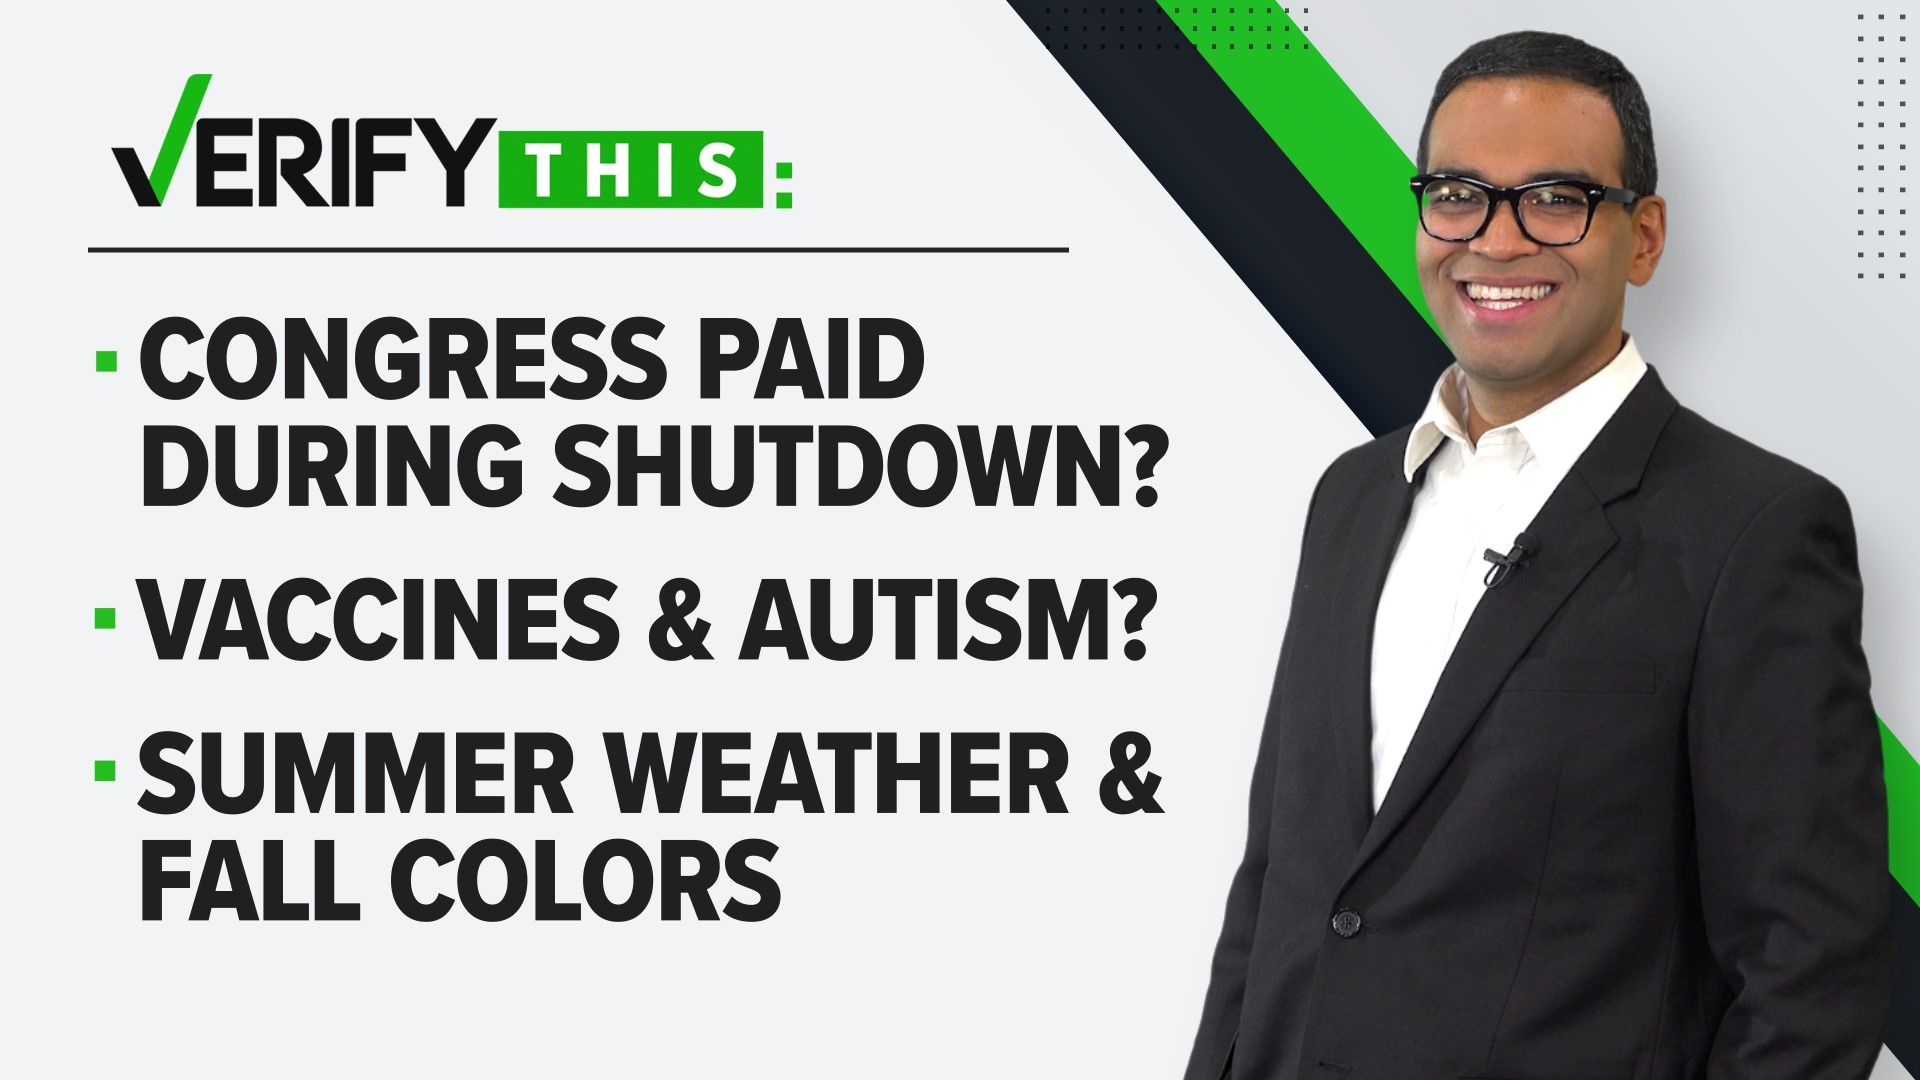 In this episode, we look into the effects of a government shutdown on employees & veterans, the truth behind vaccines & autism and impact of summer on fall colors.